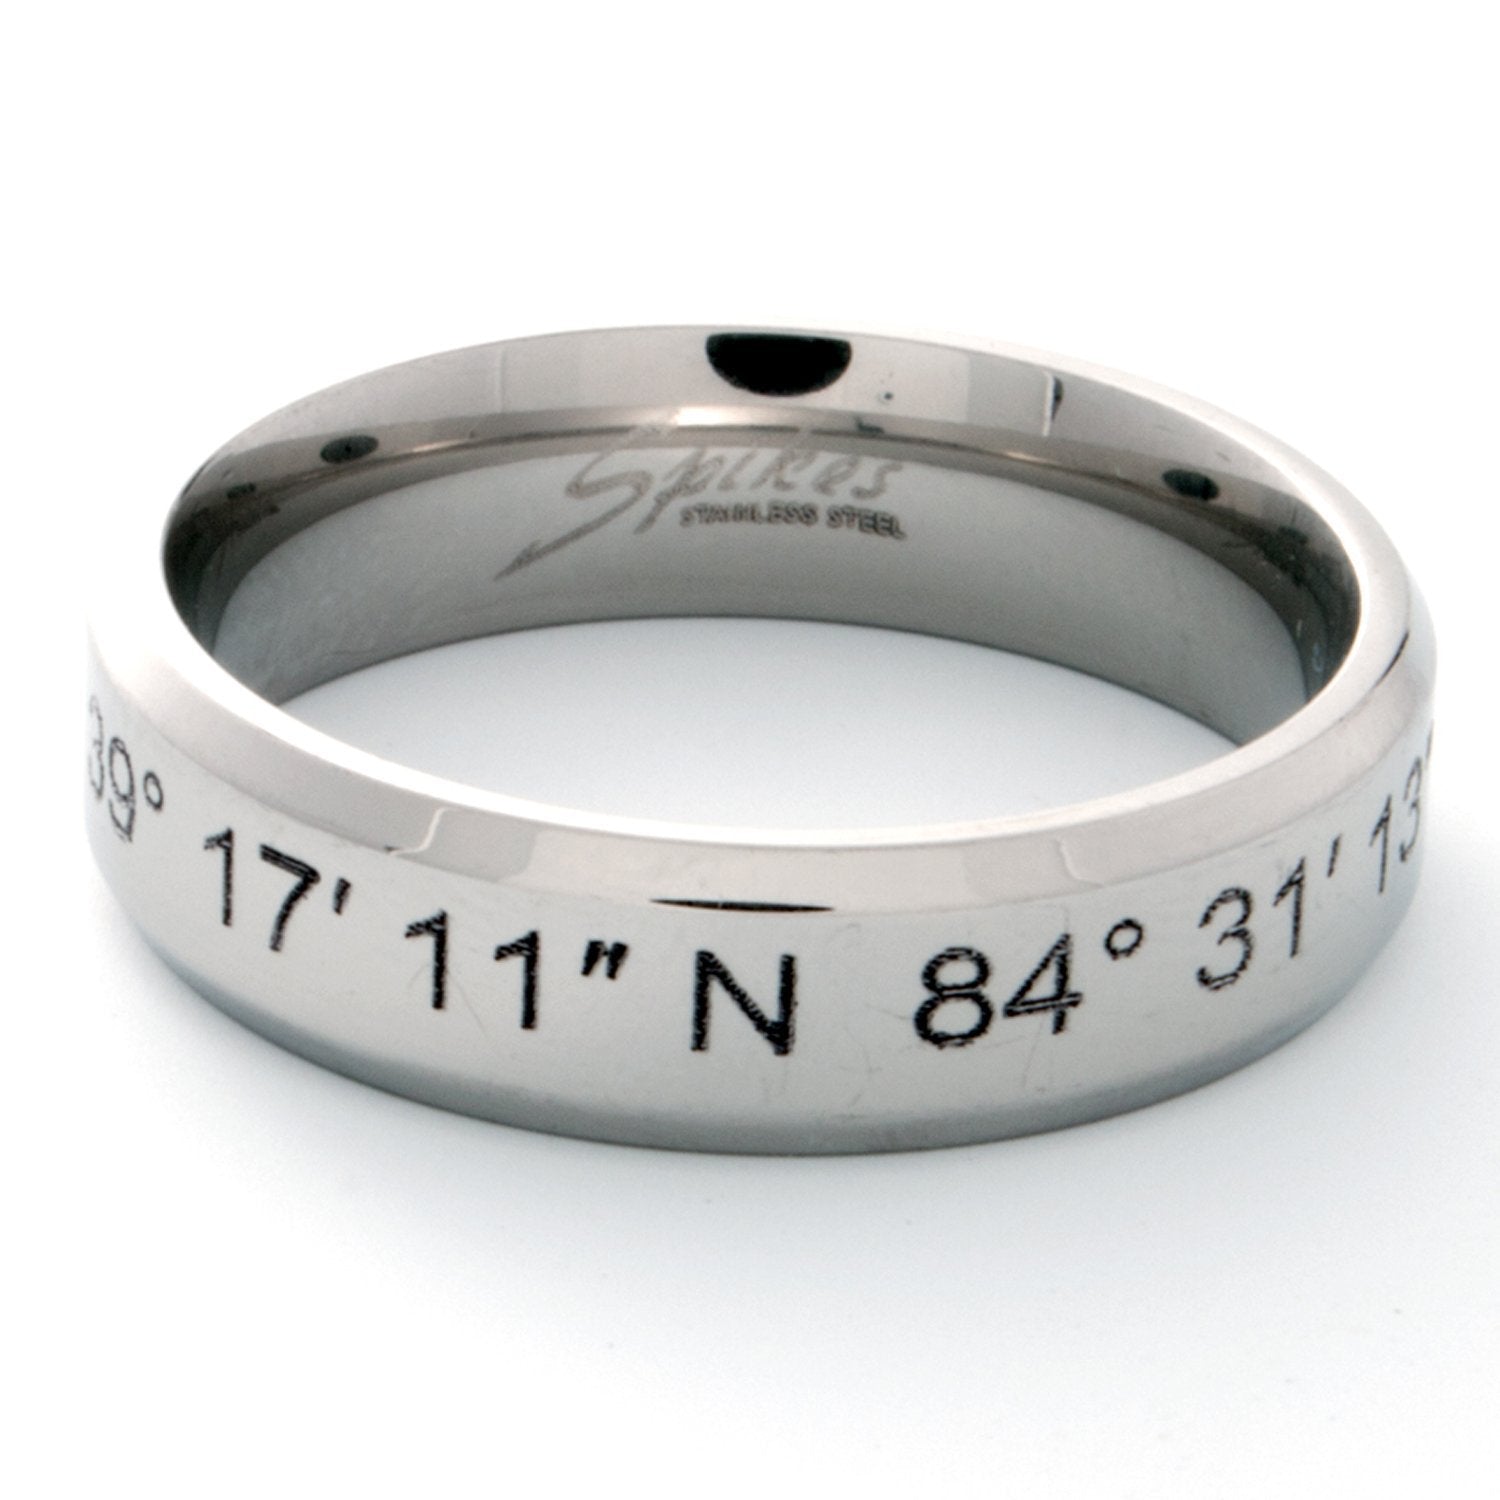 Buy Custom Engraved Coordinates Ring - Personalized Unisex Jewelry at Petite Boutique